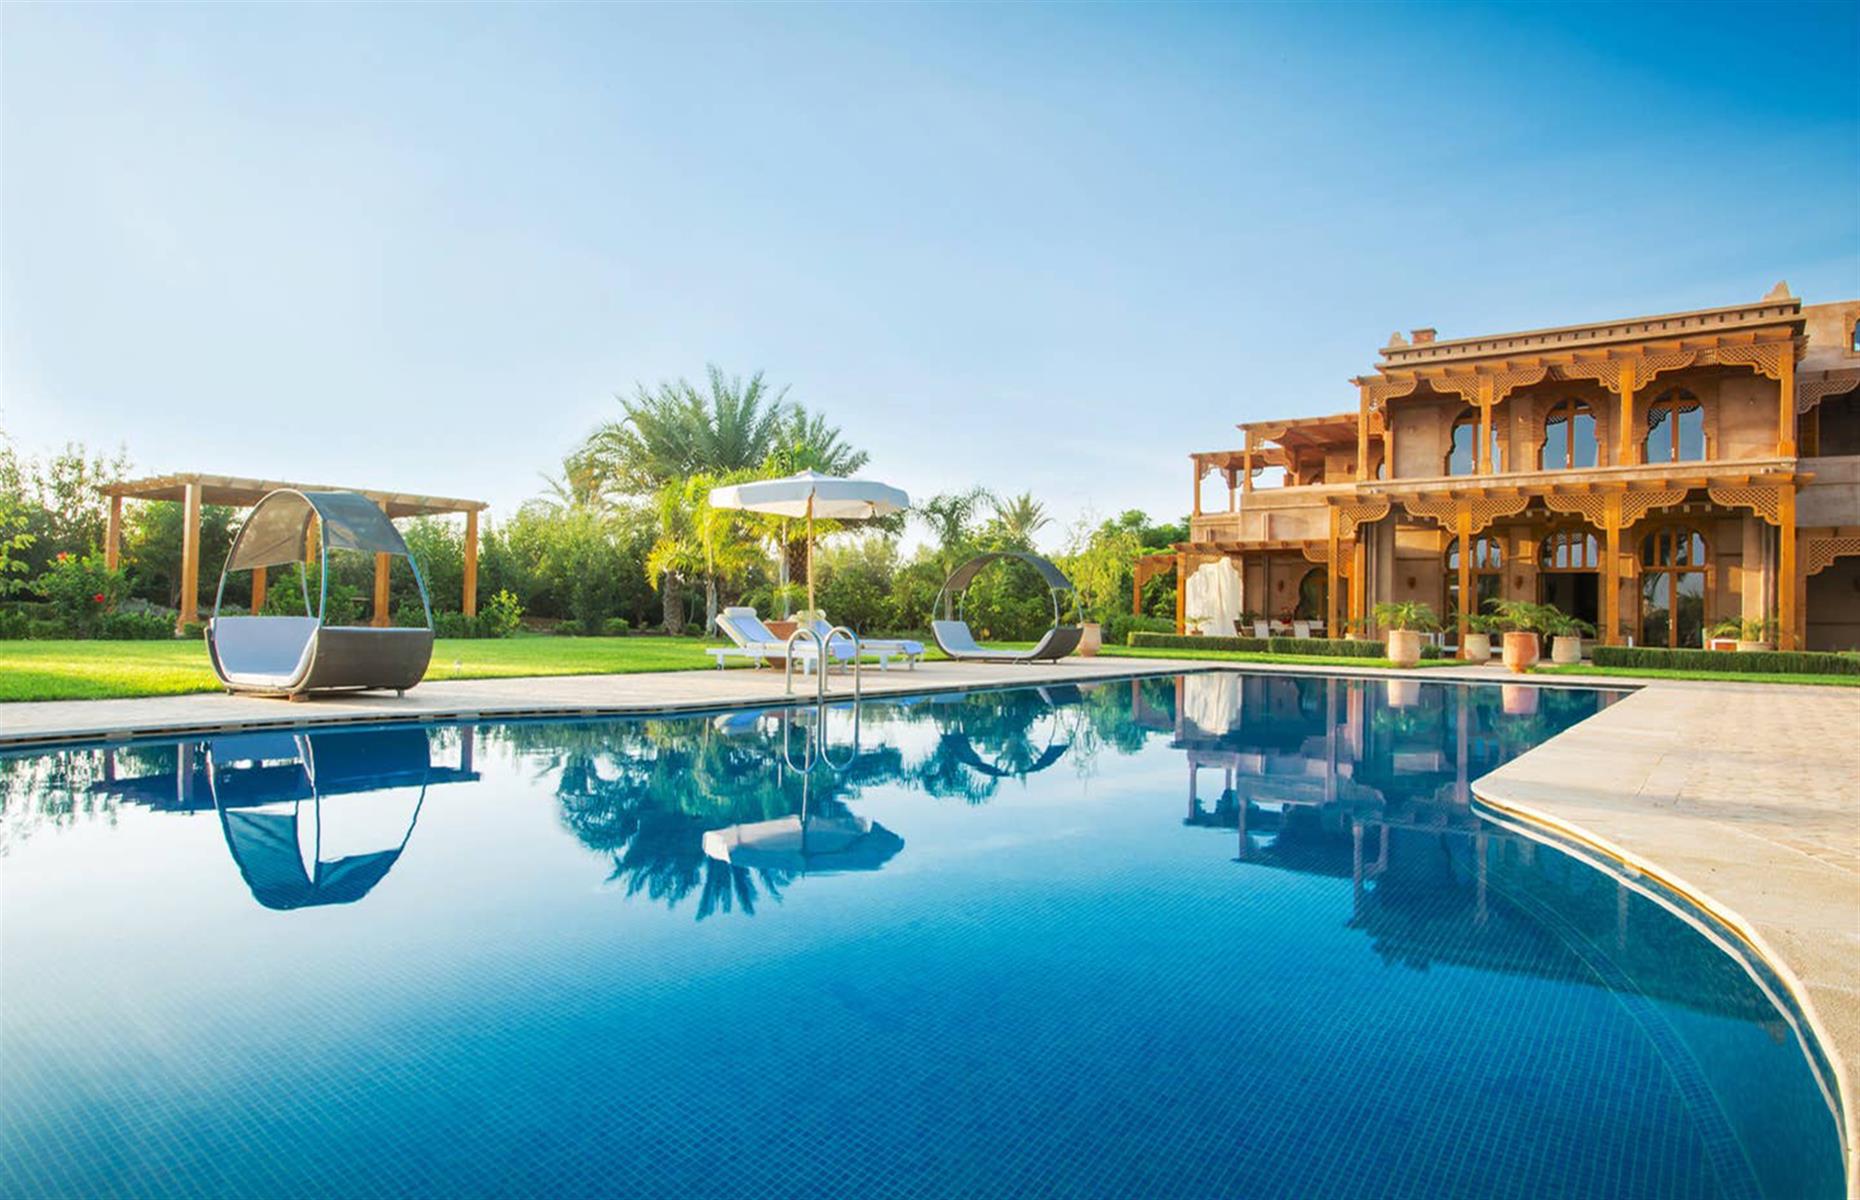 <p>Like something out of a real-life Arabian dream, <a href="https://www.airbnb.co.uk/rooms/7608507">this exquisite Moroccan villa</a> near Marrakech has five bedrooms and is beautifully decorated throughout with lots of North African and Arabic motifs. Built around a covered central riad-style courtyard, it's brilliant for escaping the hubbub of the city. There's also an opportunity to hire a private driver during the stay.</p>